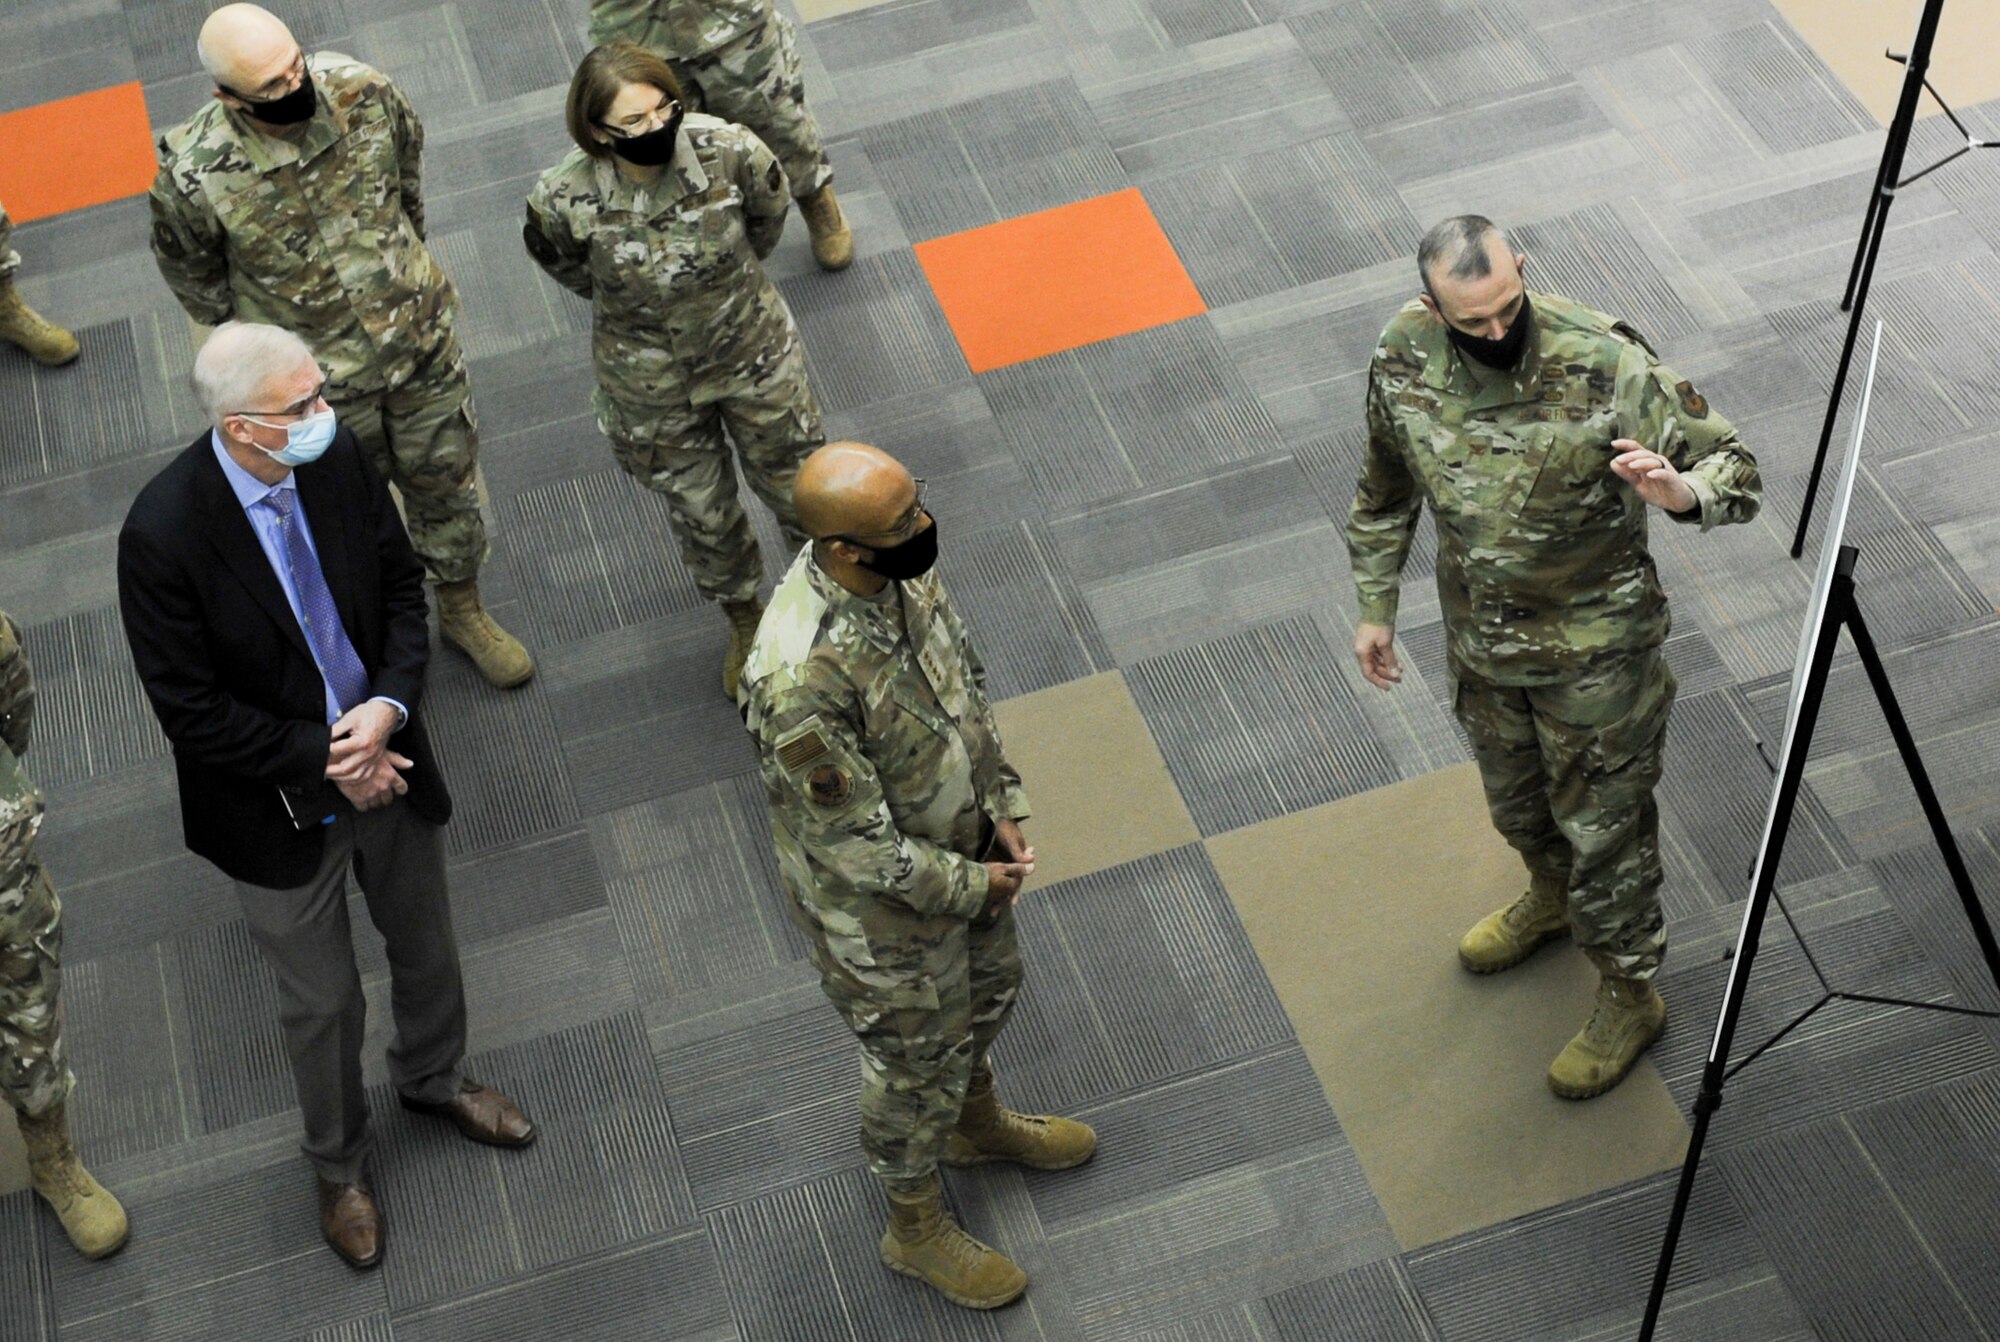 Col. Maurizio Calabrese, National Air and Space Intelligence Center Commander, briefs Air Force Chief of Staff Gen. Charles Q. Brown, Jr. during the CSAF’s trip to Wright-Patterson Air Force Base, Ohio Dec. 3, 2020. As Air Force senior leaders look on, Calabrese explained to the Chief of Staff what NASIC is doing to accelerate the foundational scientific and technical intelligence needed to enable joint all-domain command and control. (U.S. Air Force photo by Senior Airman Samuel Earick)